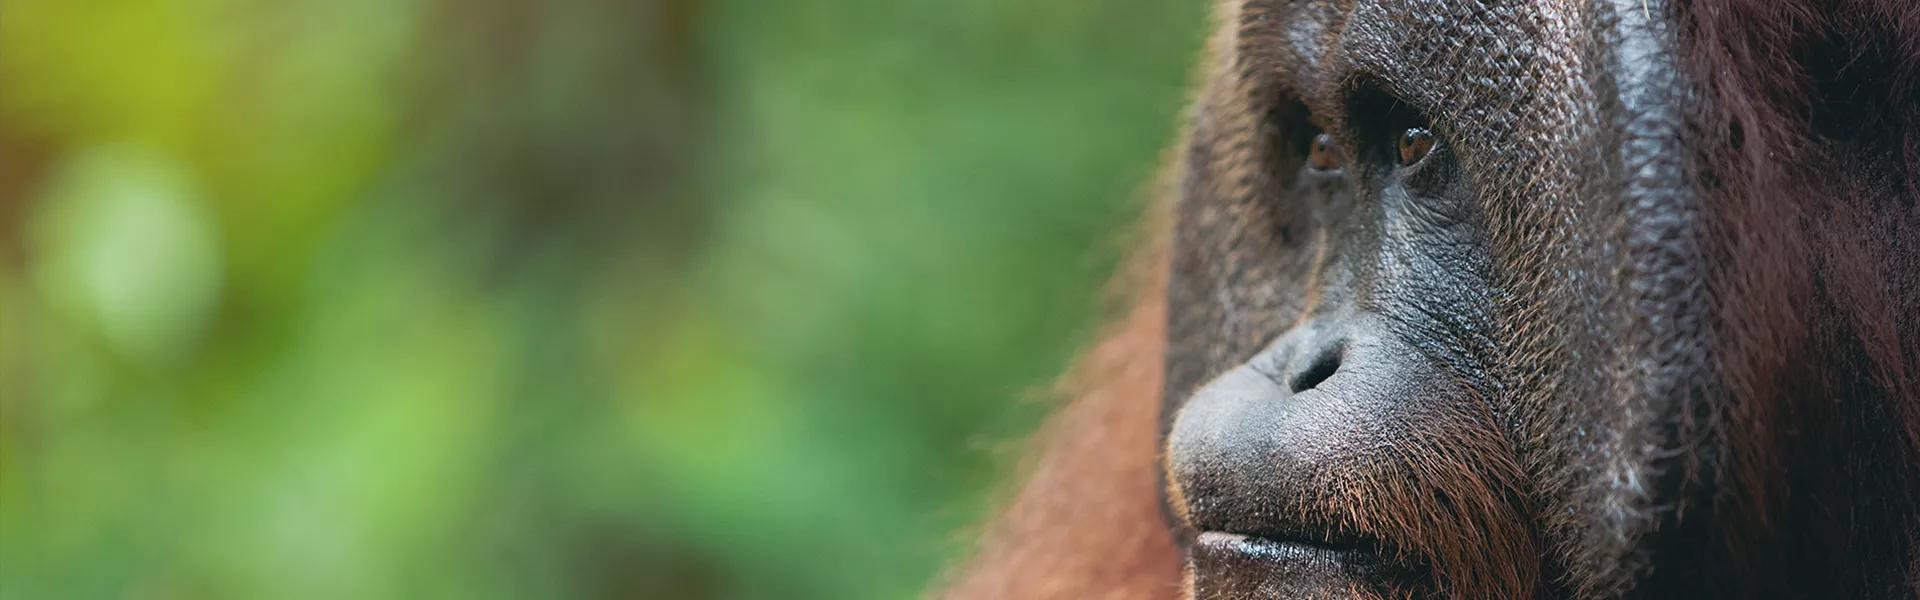 A close up of an oranguel looking at something